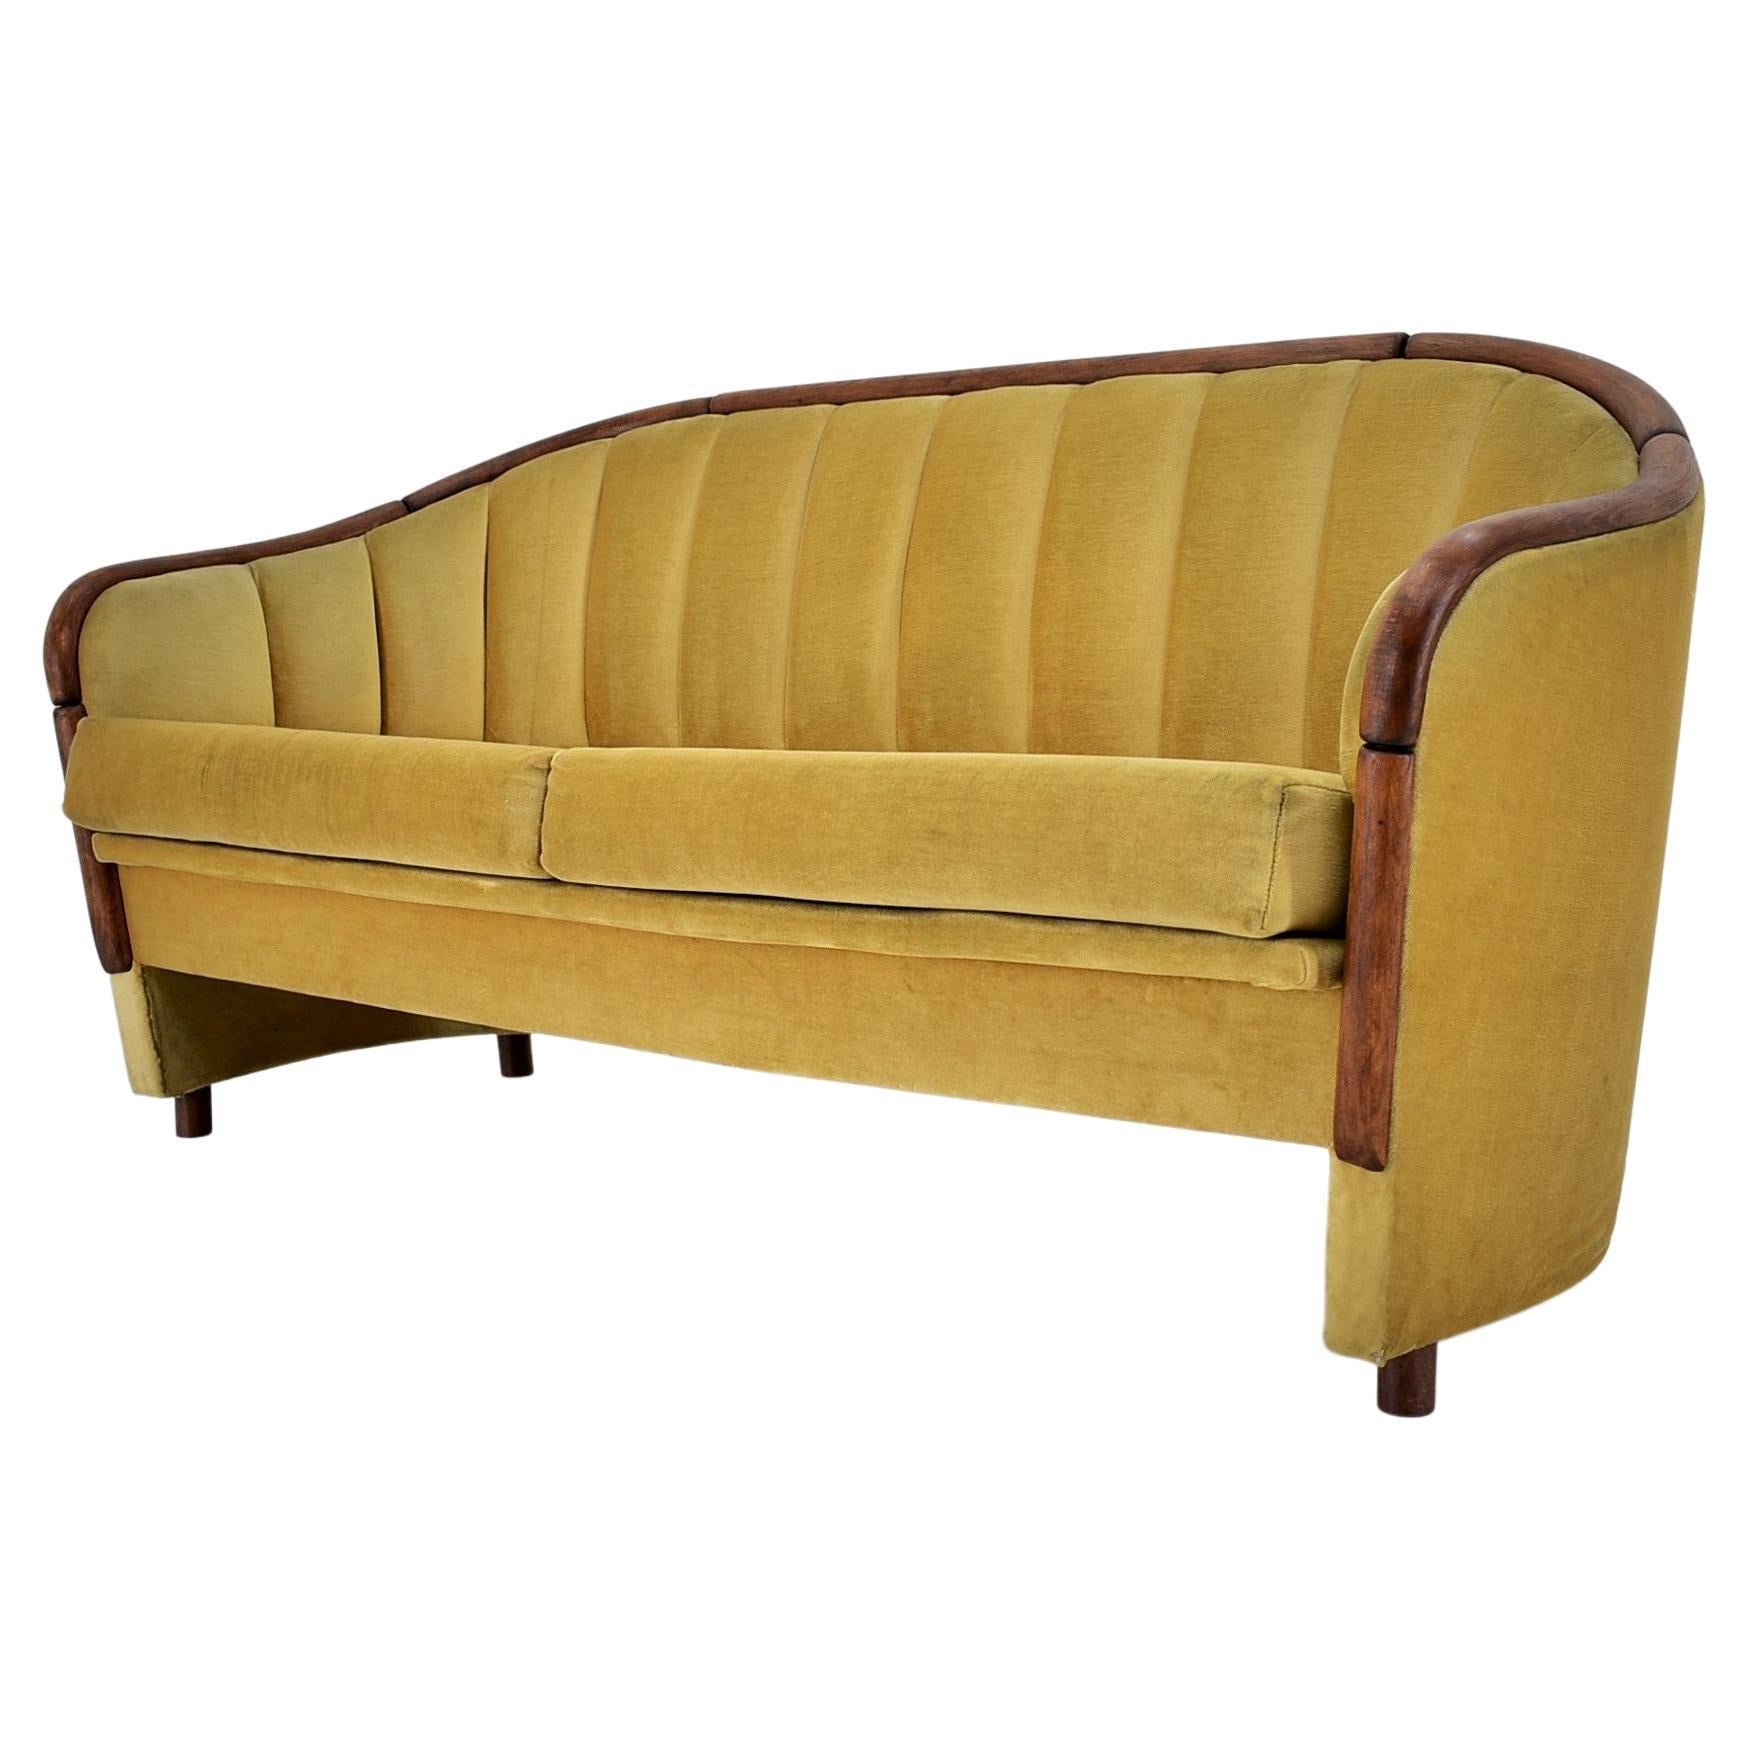 Italian 2-Seat Sofa in the Style of Gio Ponti, 1950s For Sale